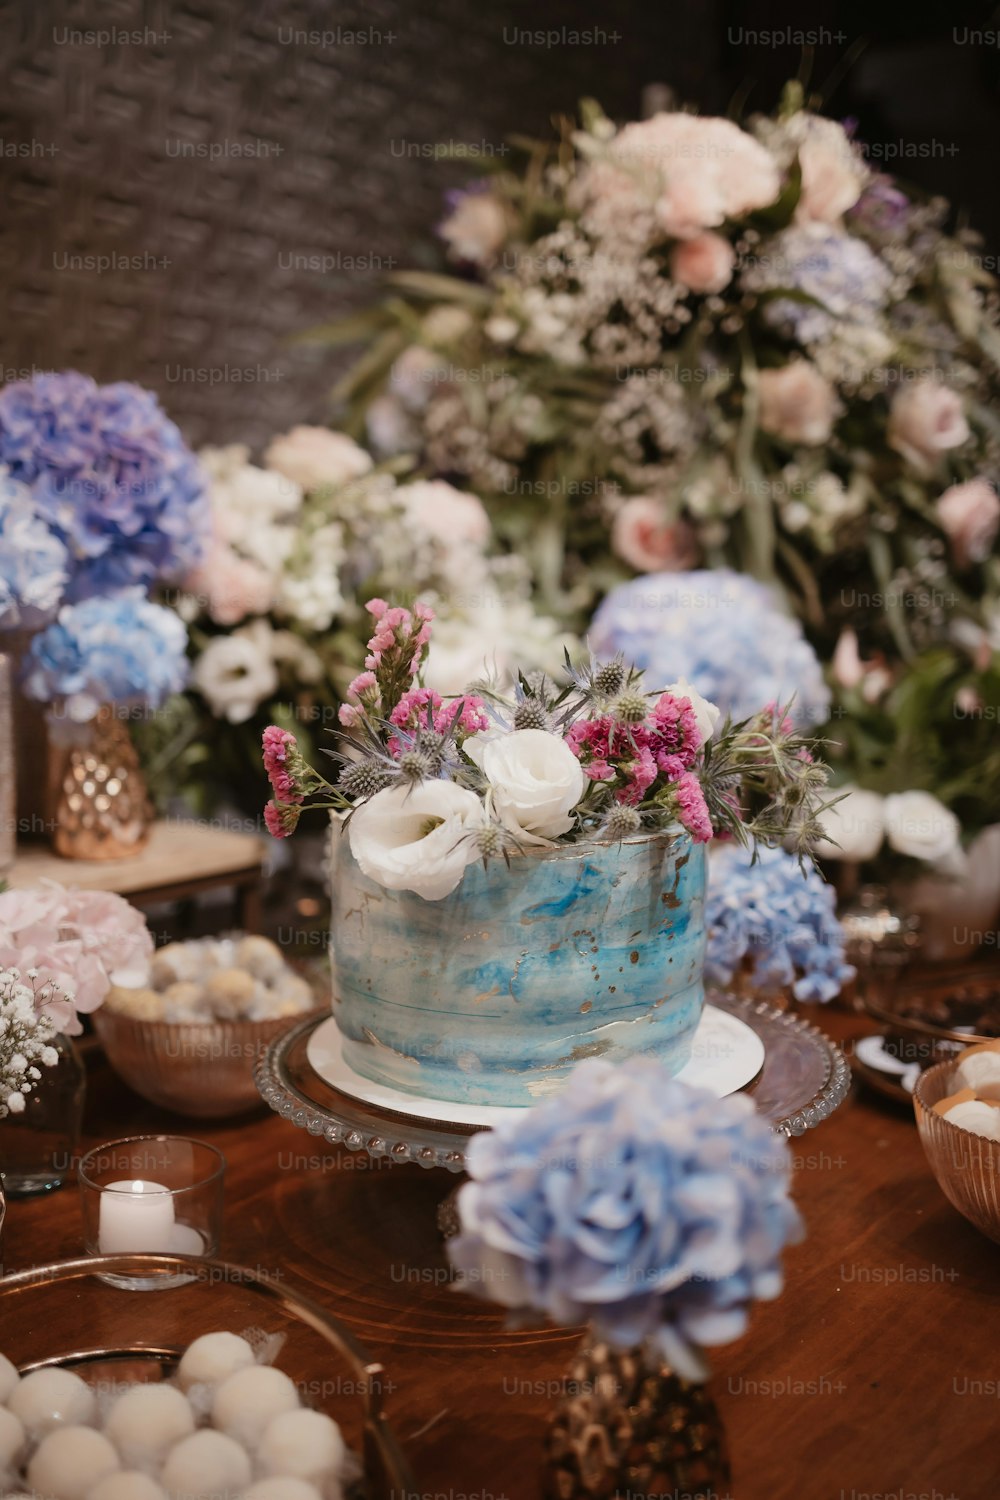 a blue and white cake sitting on top of a wooden table